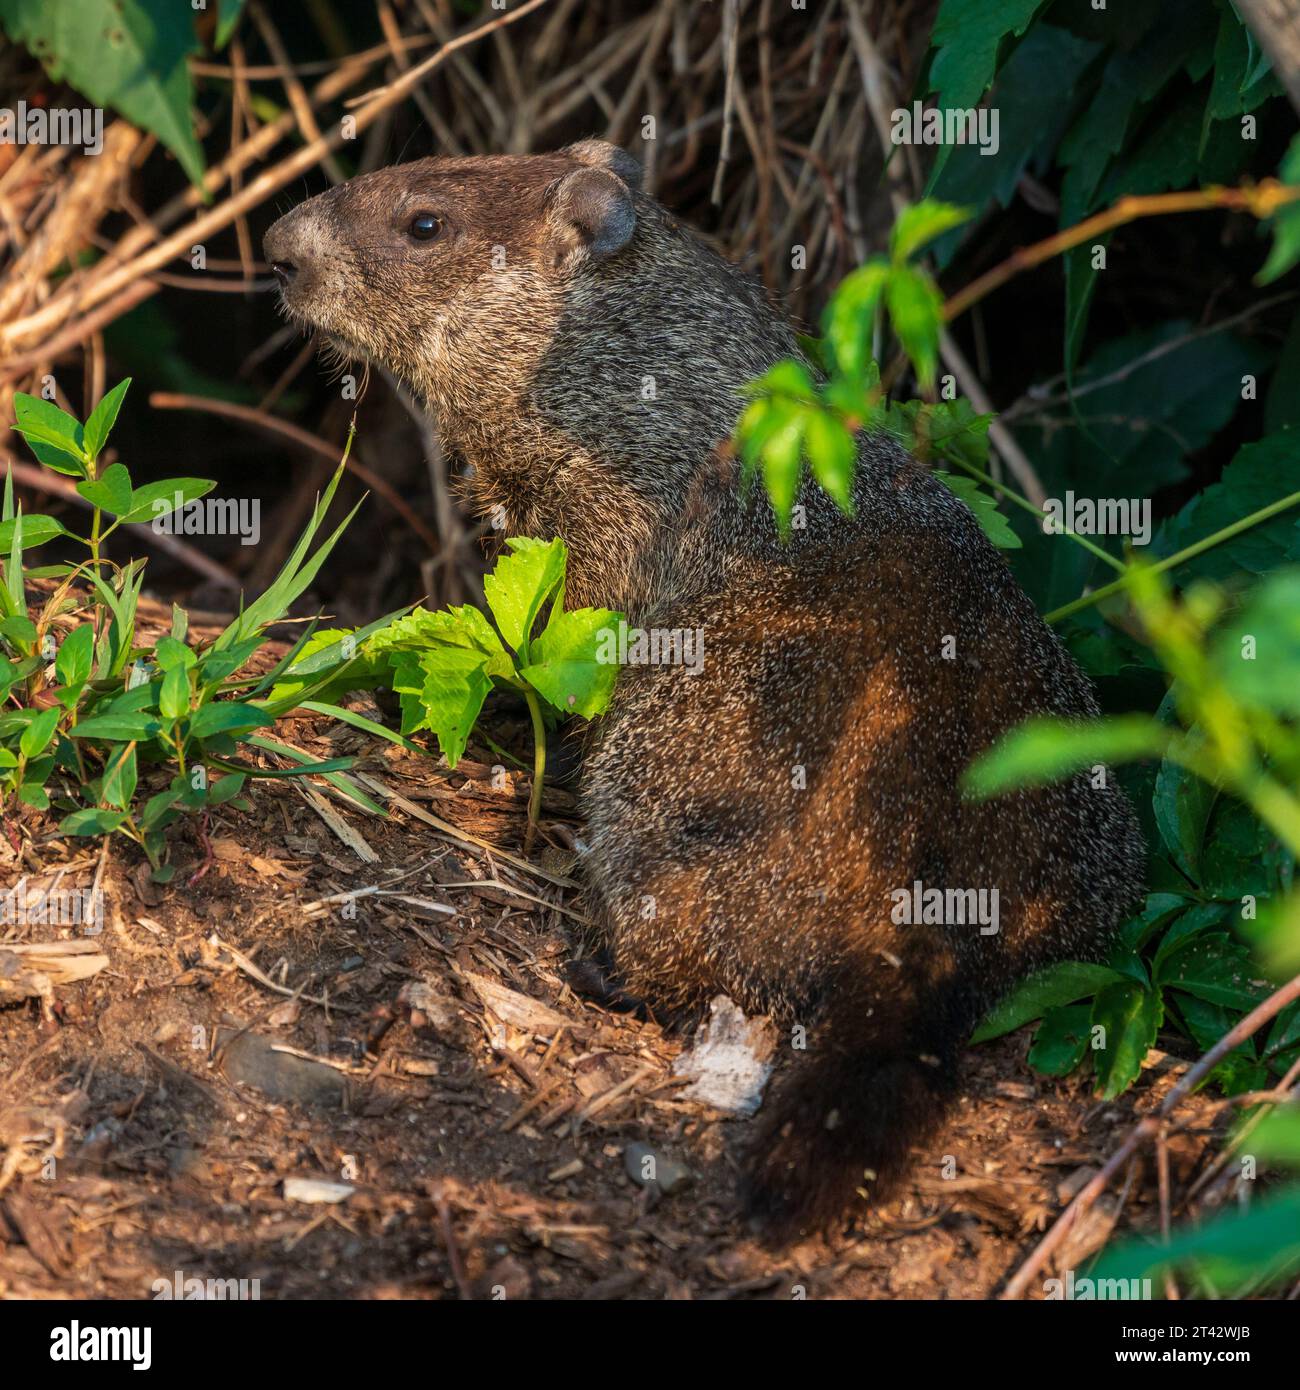 Woodchuck Taking Cover in Summer Foliage Stock Photo